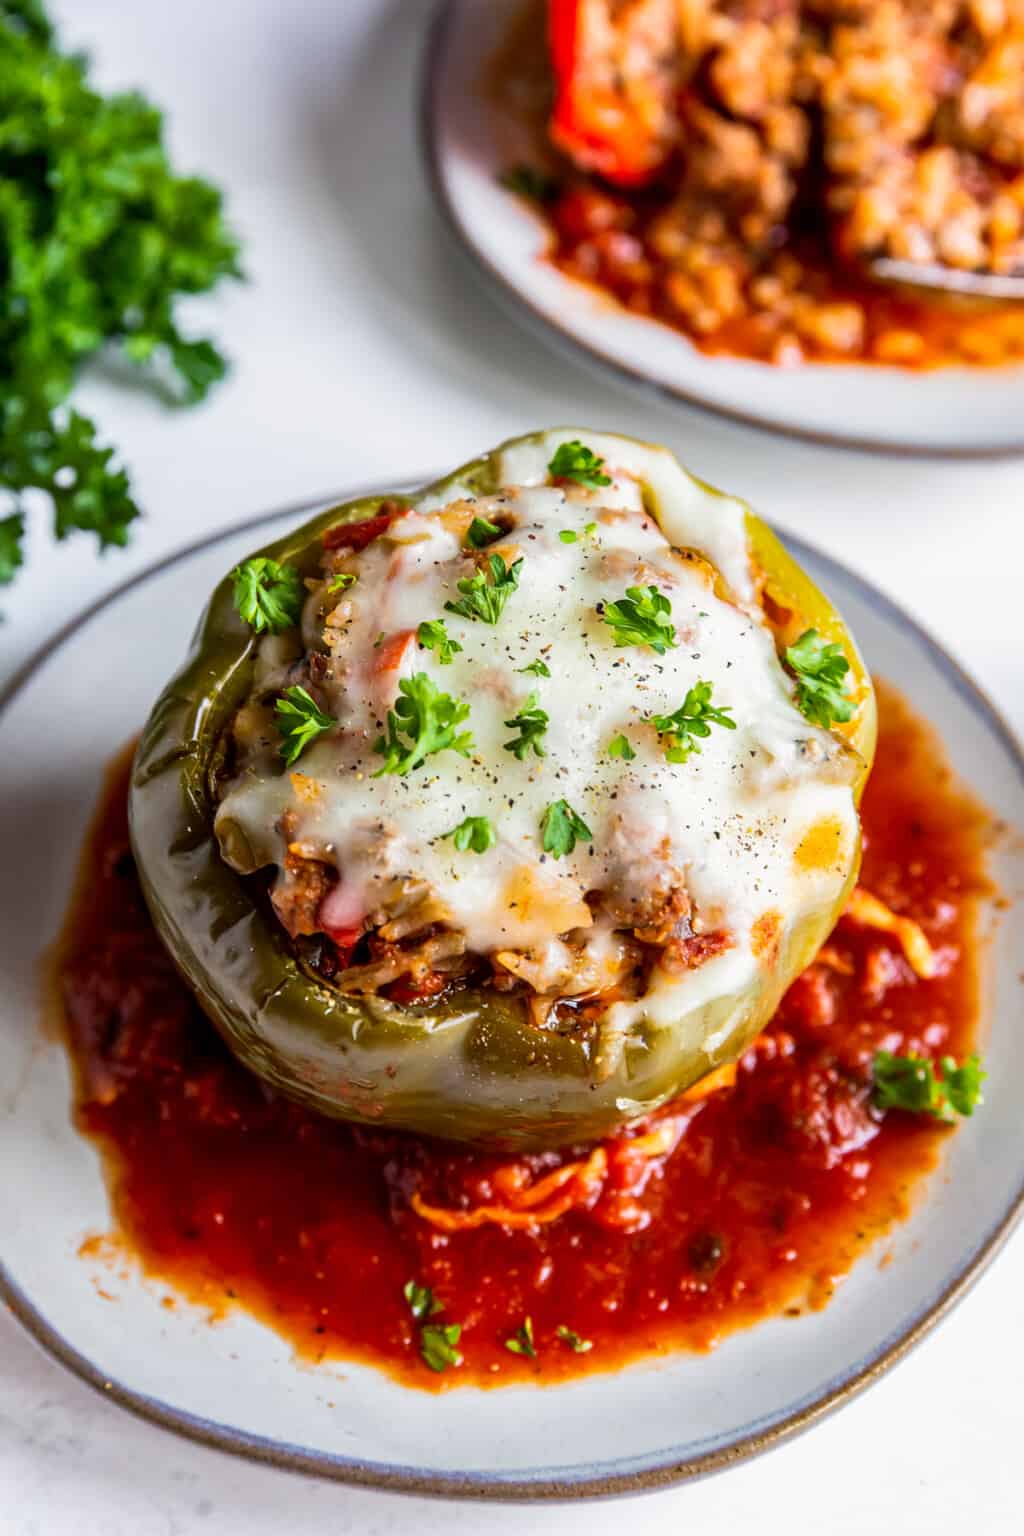 Crockpot Stuffed Peppers The Cookie Rookie